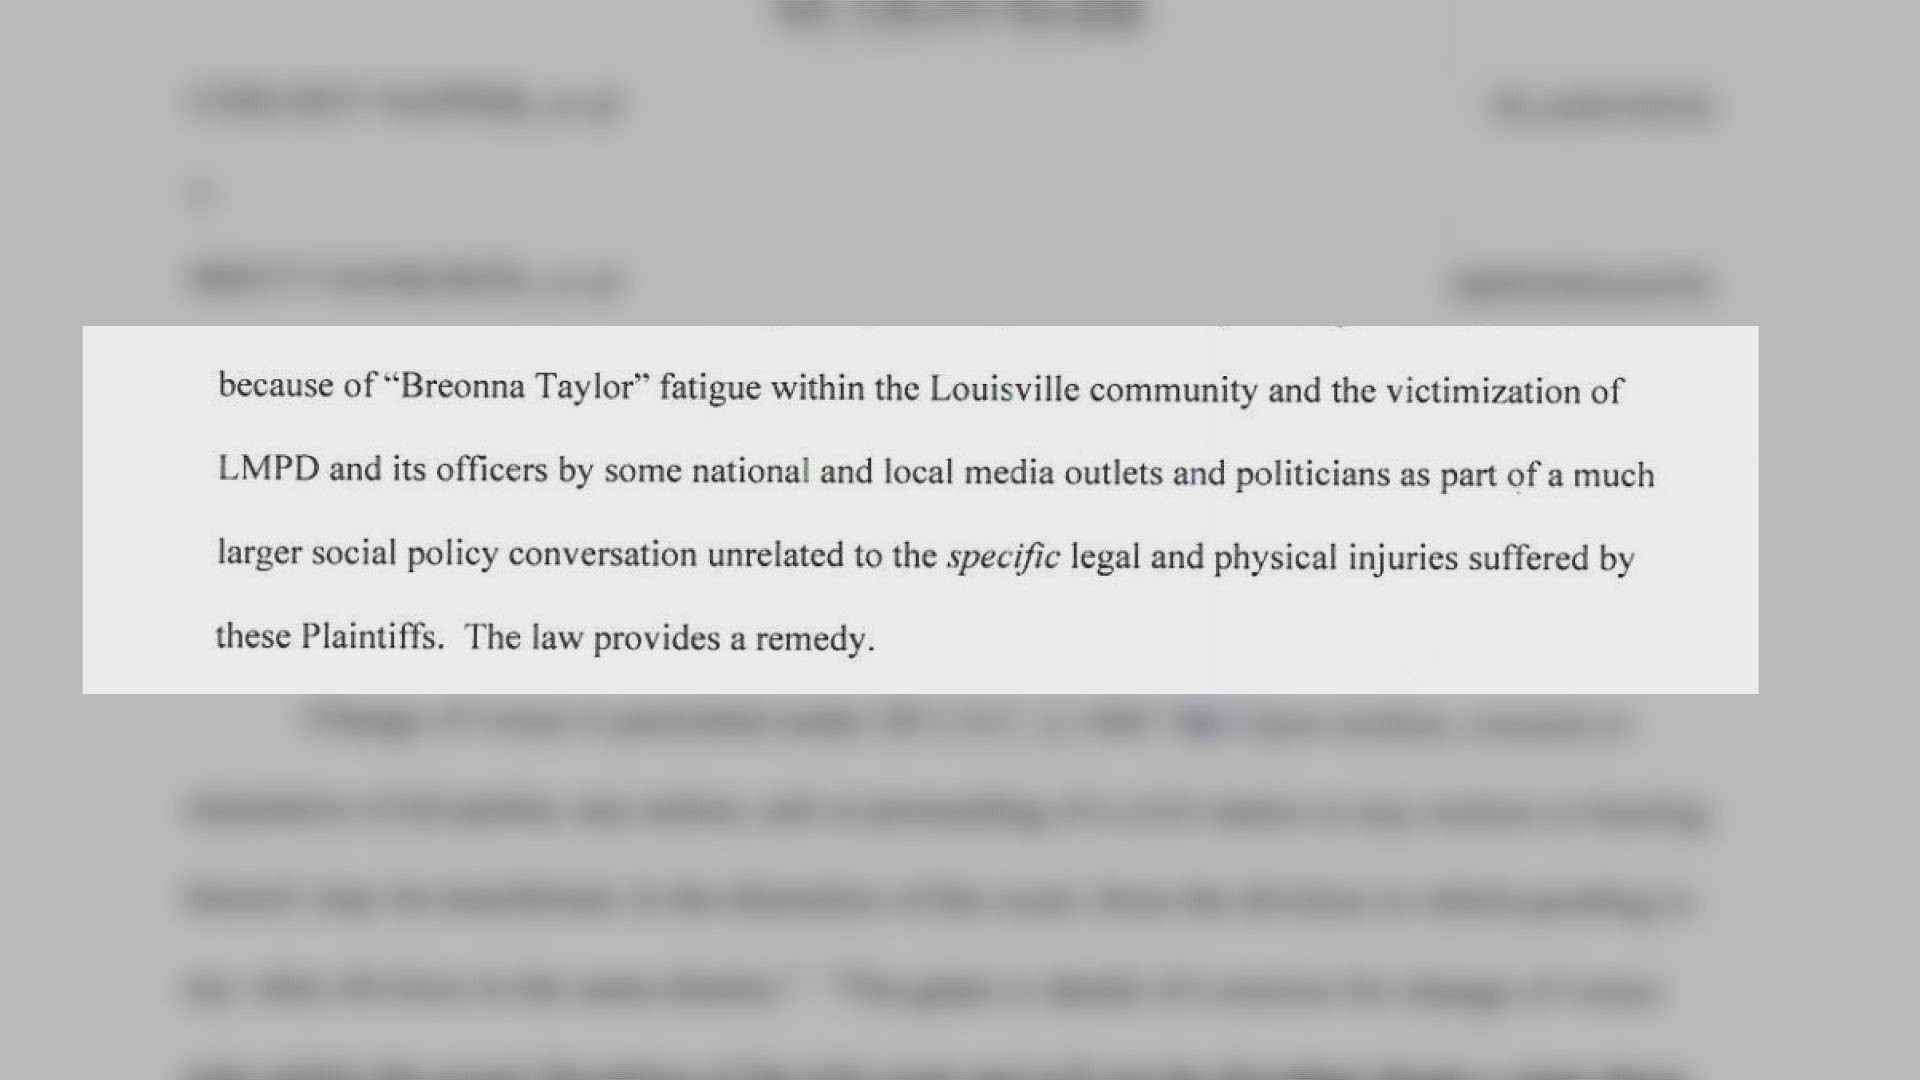 When asked about the word "fatigue," Attorney Jeff Sexton said the case is not about Breonna Taylor, but about the violation of constitutional rights.